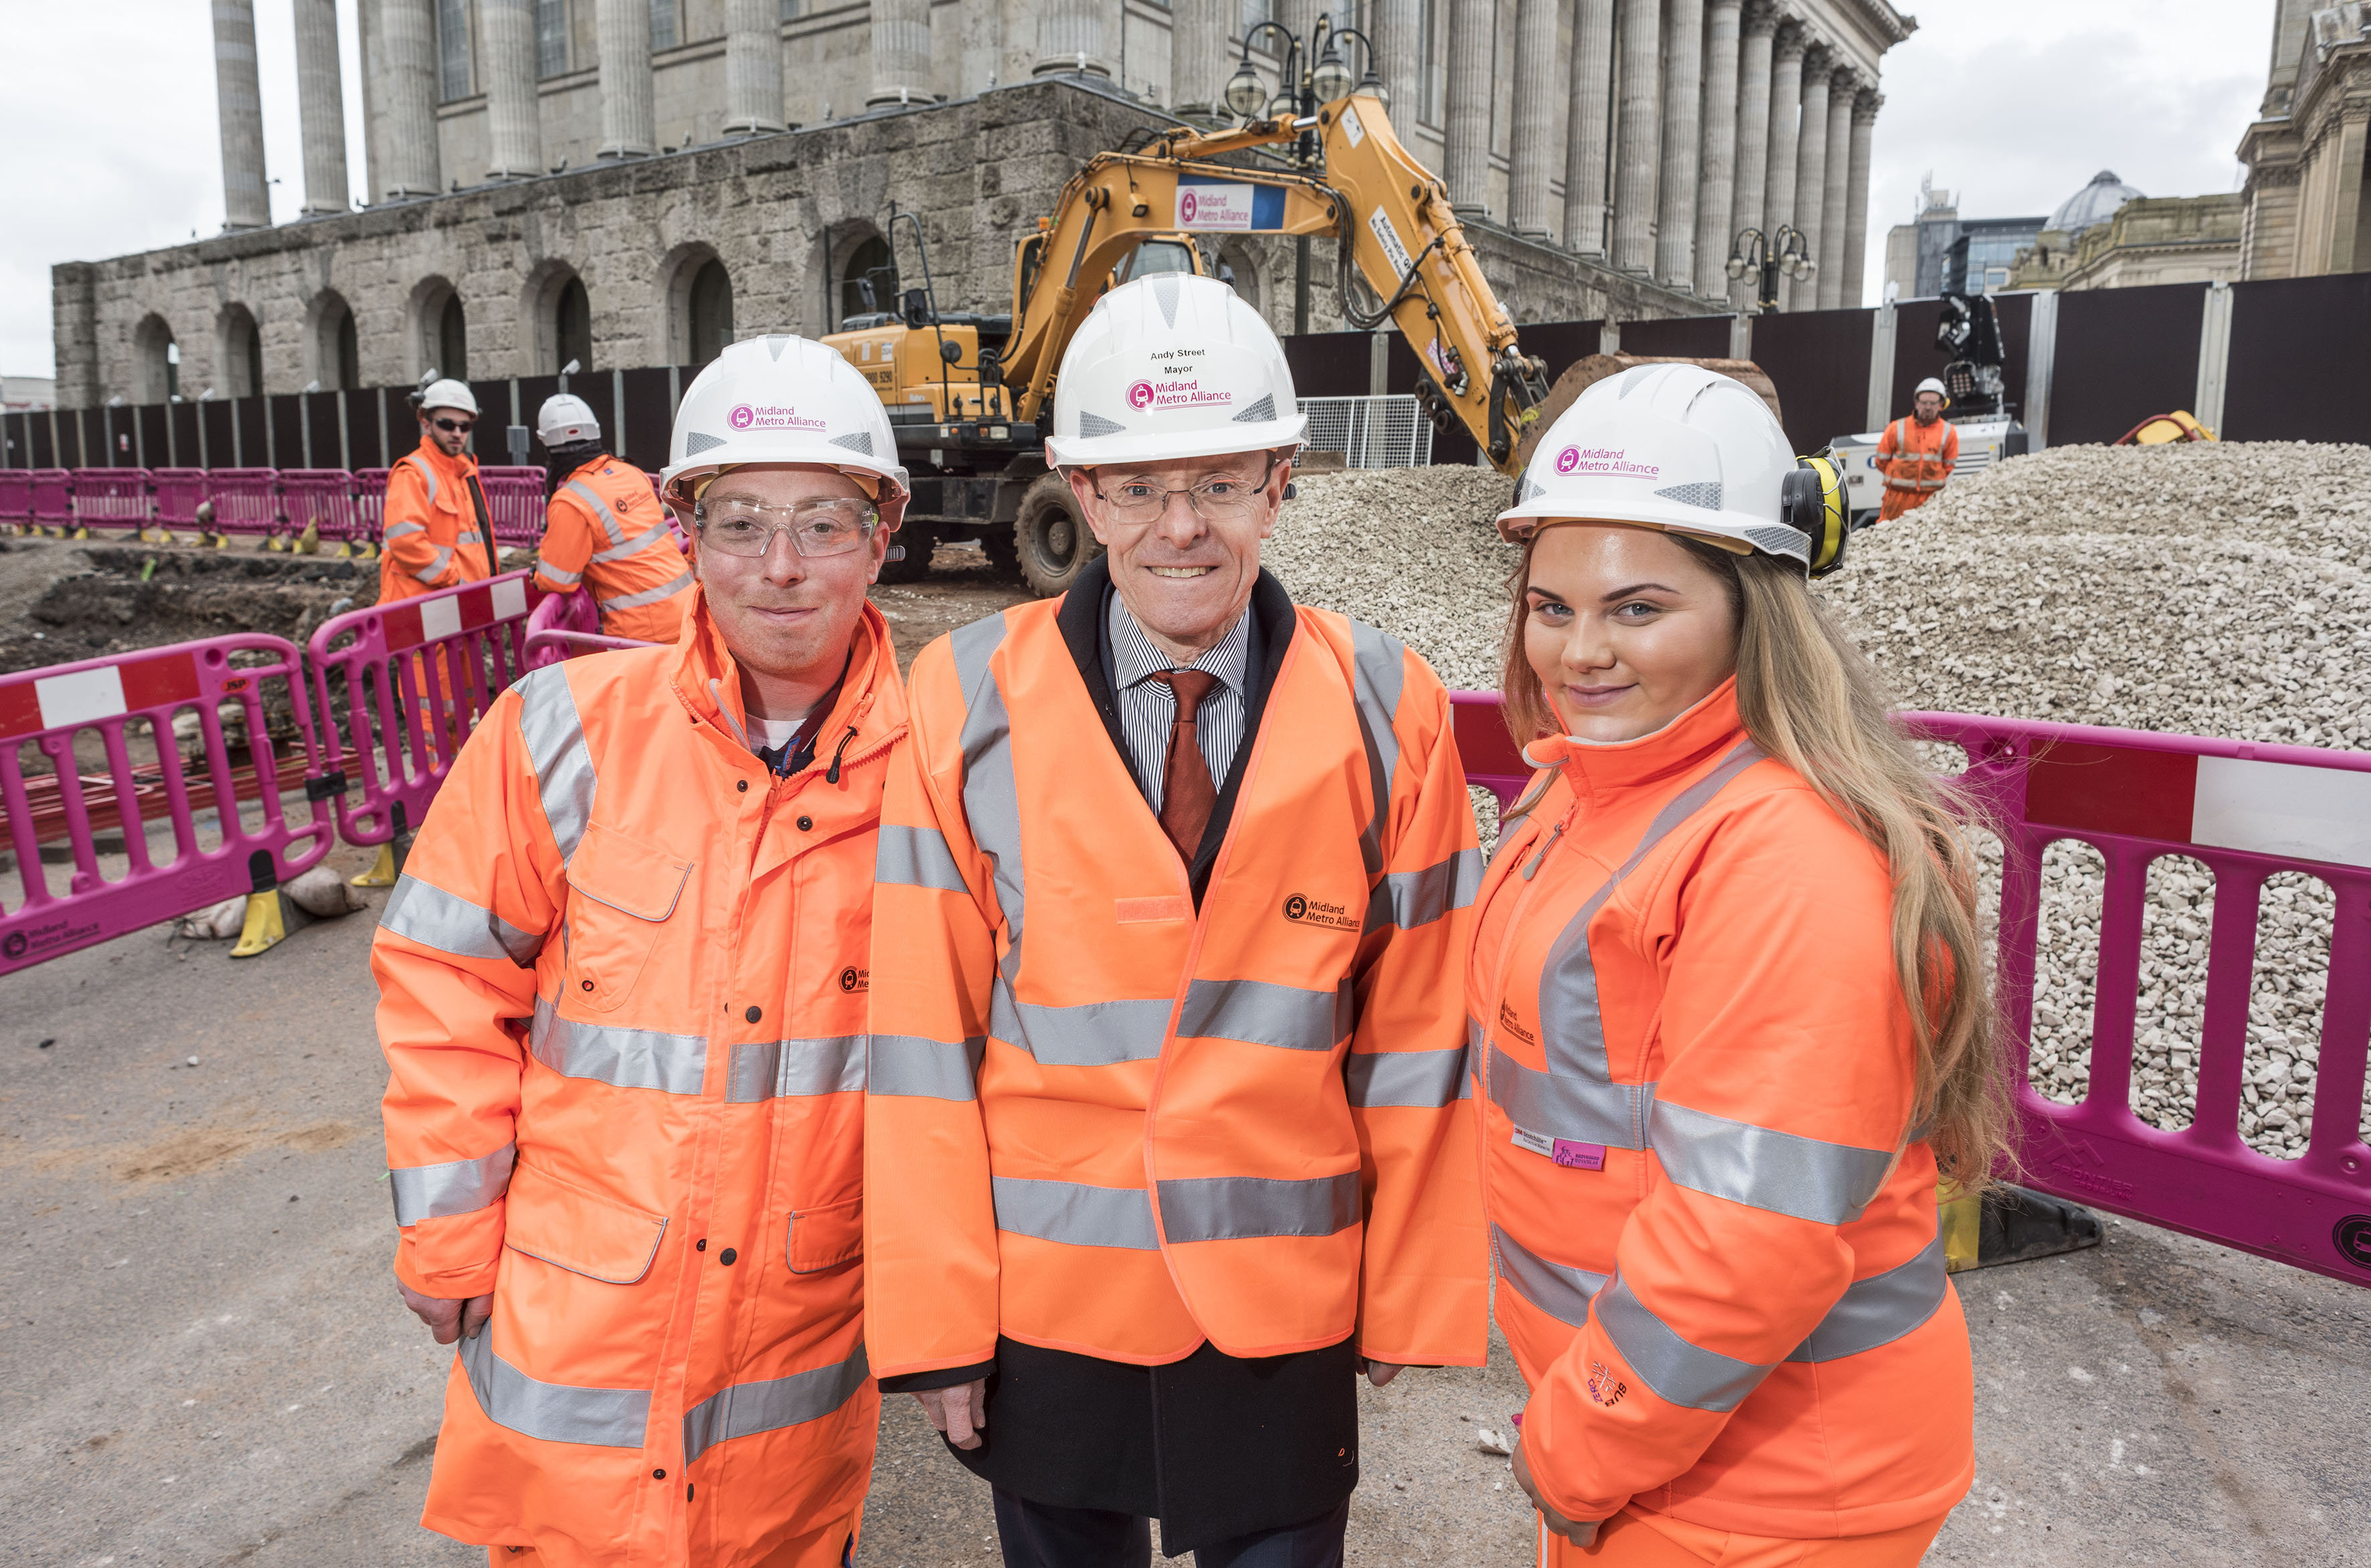 Apprentices Katie Roberts and Dan Thomas joined the Mayor of the West Midlands Andy Street at the Metro extension site in Victoria Square to celebrate National Apprenticeship Week. Apprentices Katie Roberts and Dan Thomas joined the Mayor of the West Midlands Andy Street, WMCA transport lead Cllr Roger Lawrence and productivity & skills lead Cllr George Duggins at the Metro extension site in Victoria Square to celebrate National Apprenticeship Week.